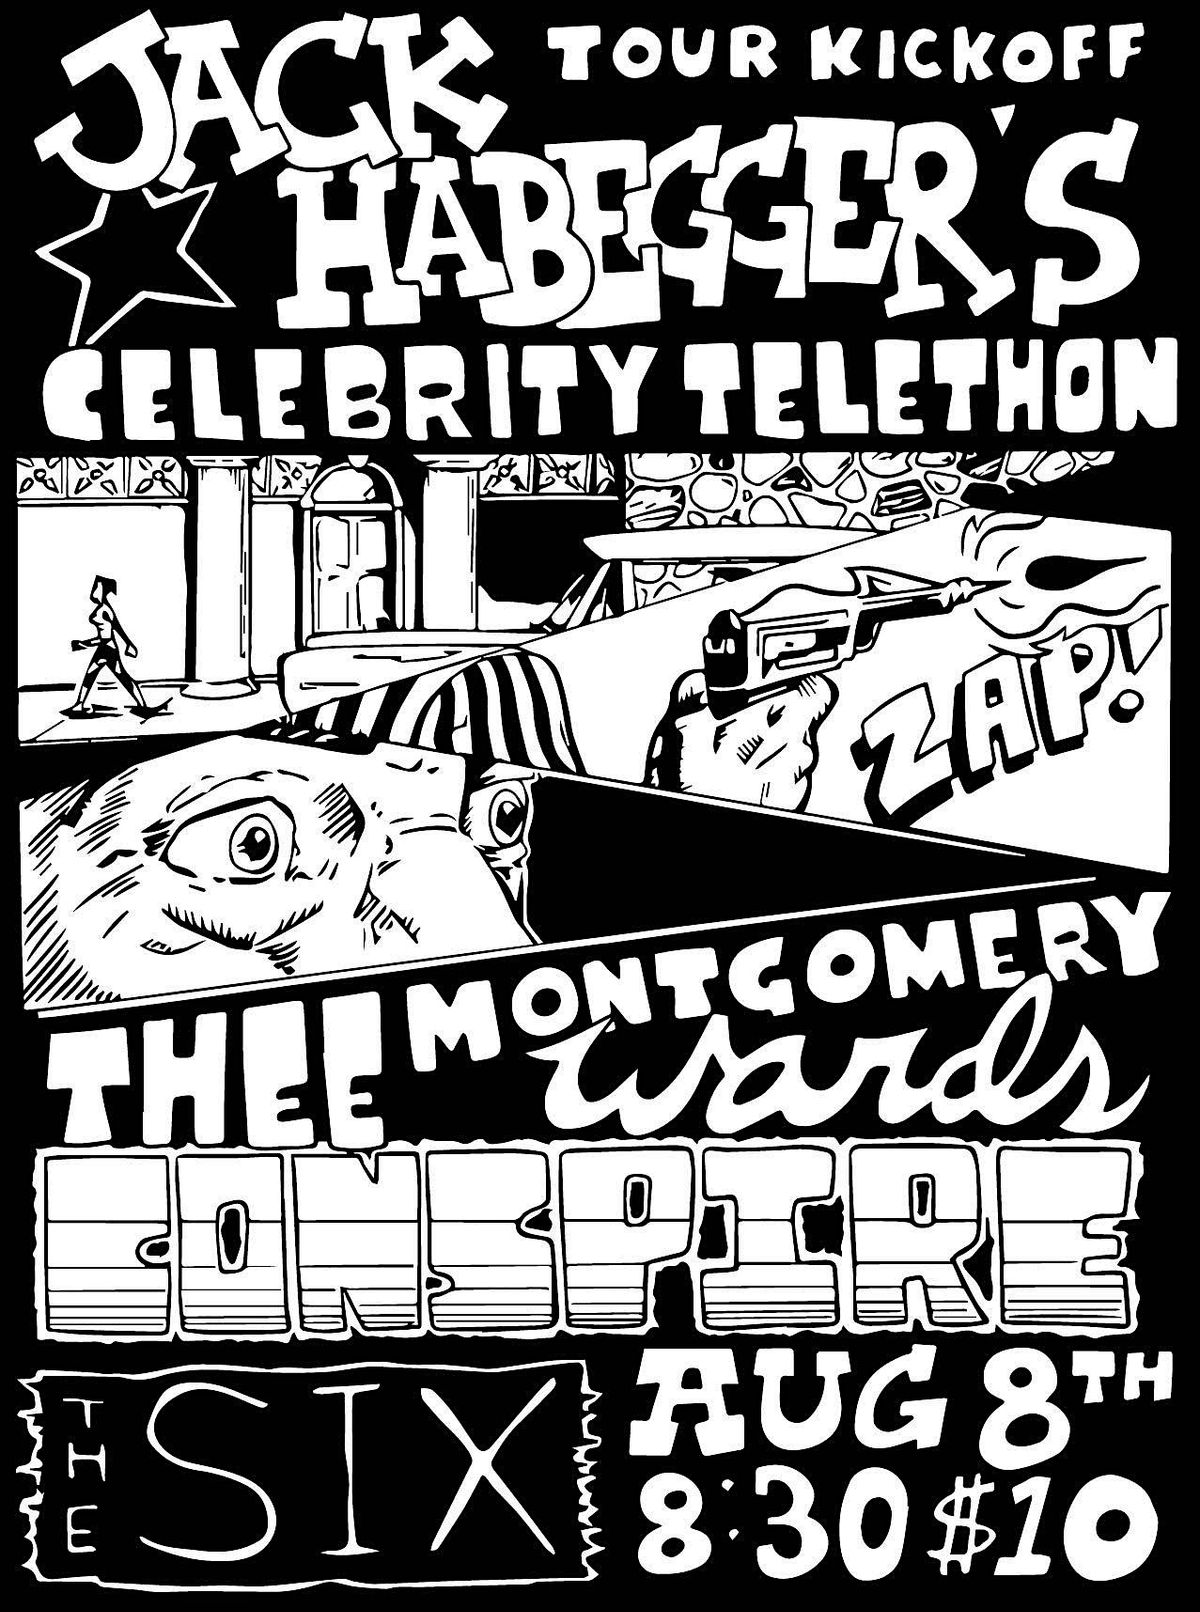 Jack Habegger's Celebrity Telethon with Thee Montgomery Wards and Conspire